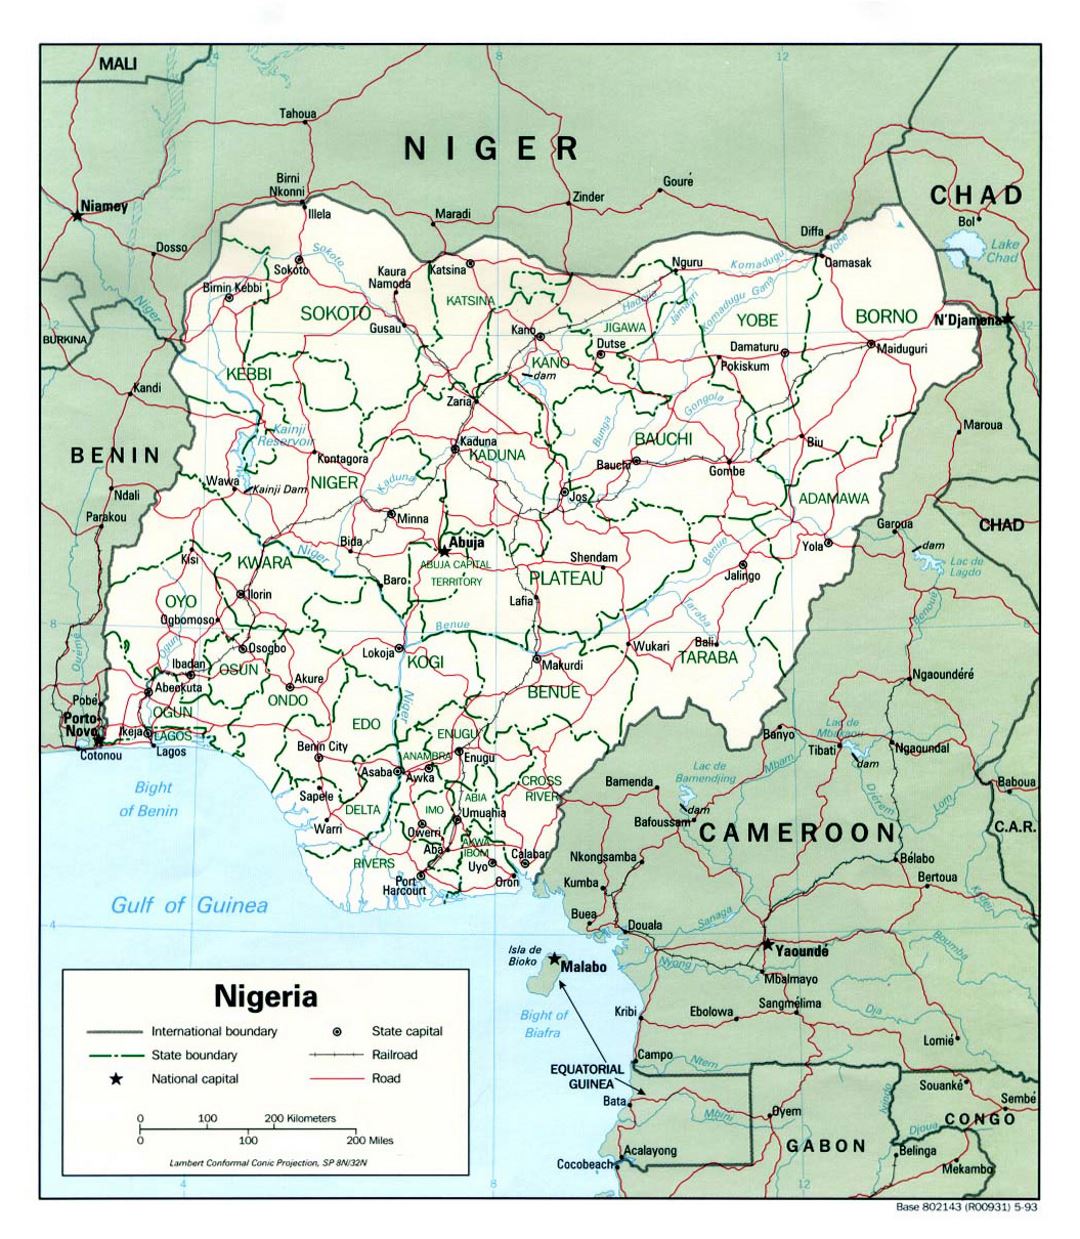 Detailed political and administrative map of Nigeria with roads, railroads and major cities - 1993